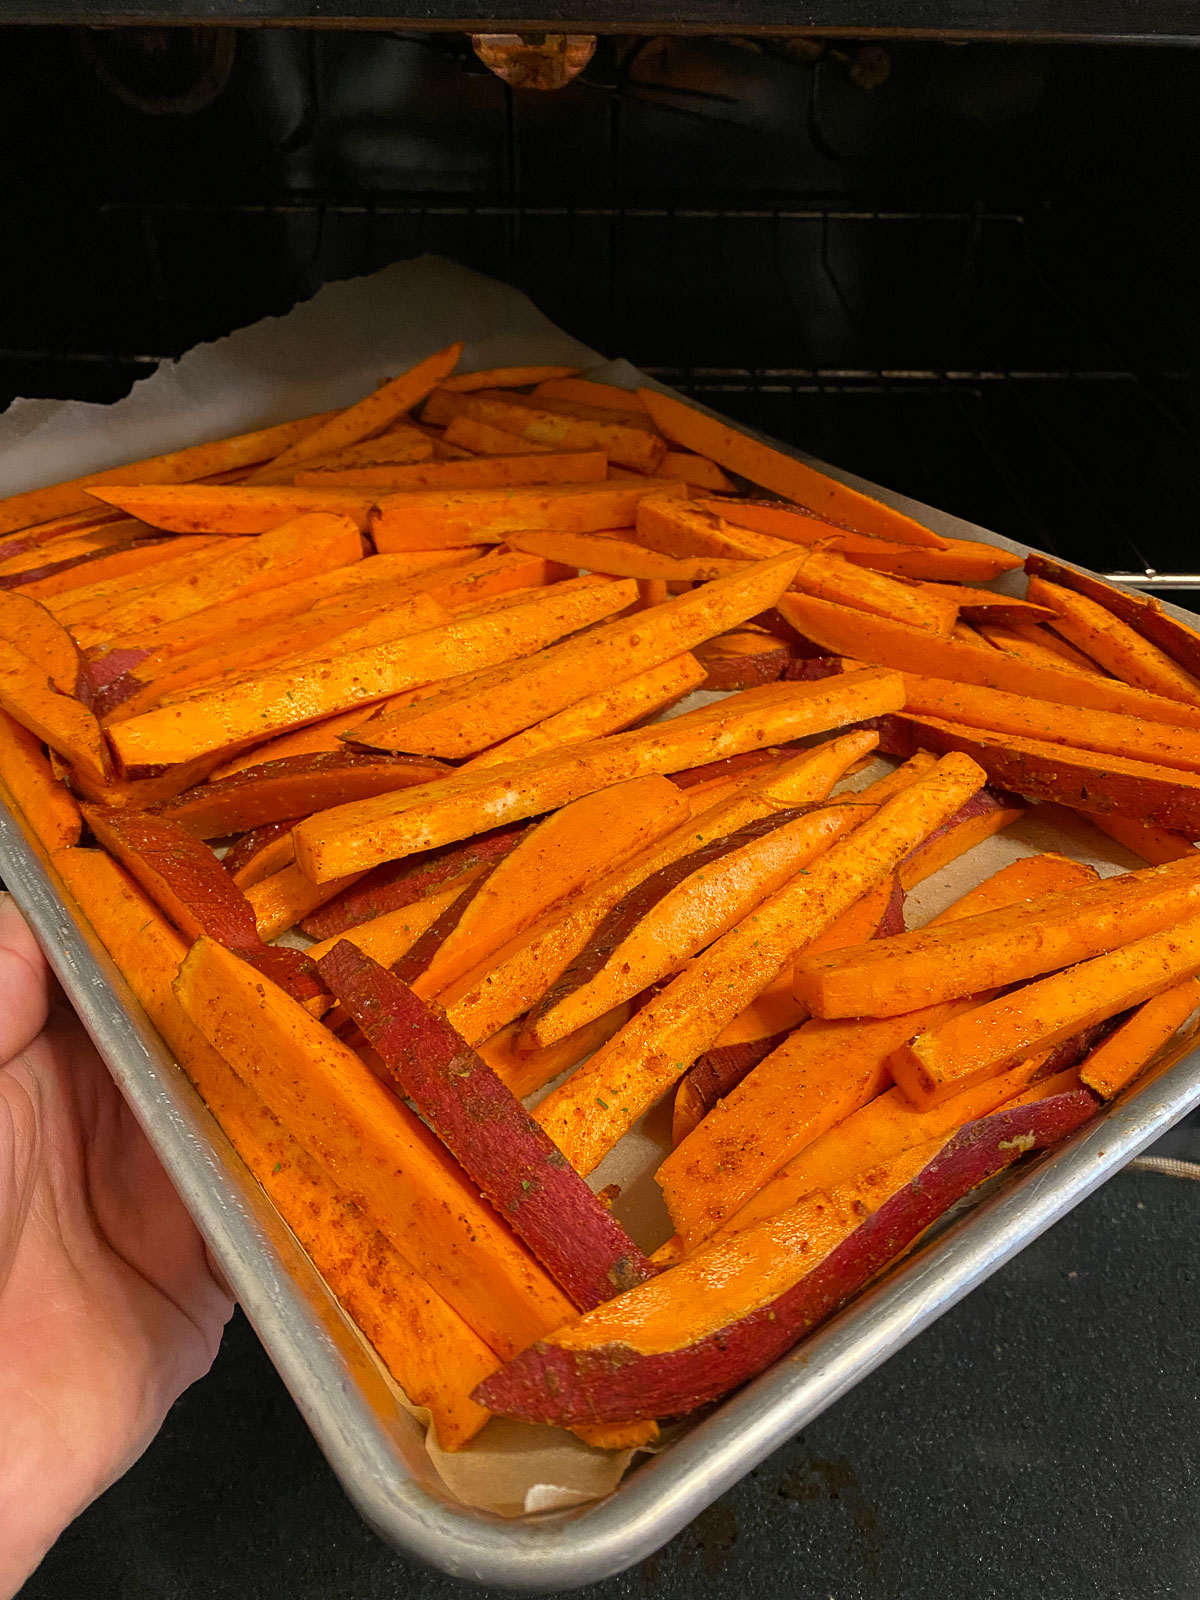 seasoned sweet potato fries in a baking tray being placed in the oven